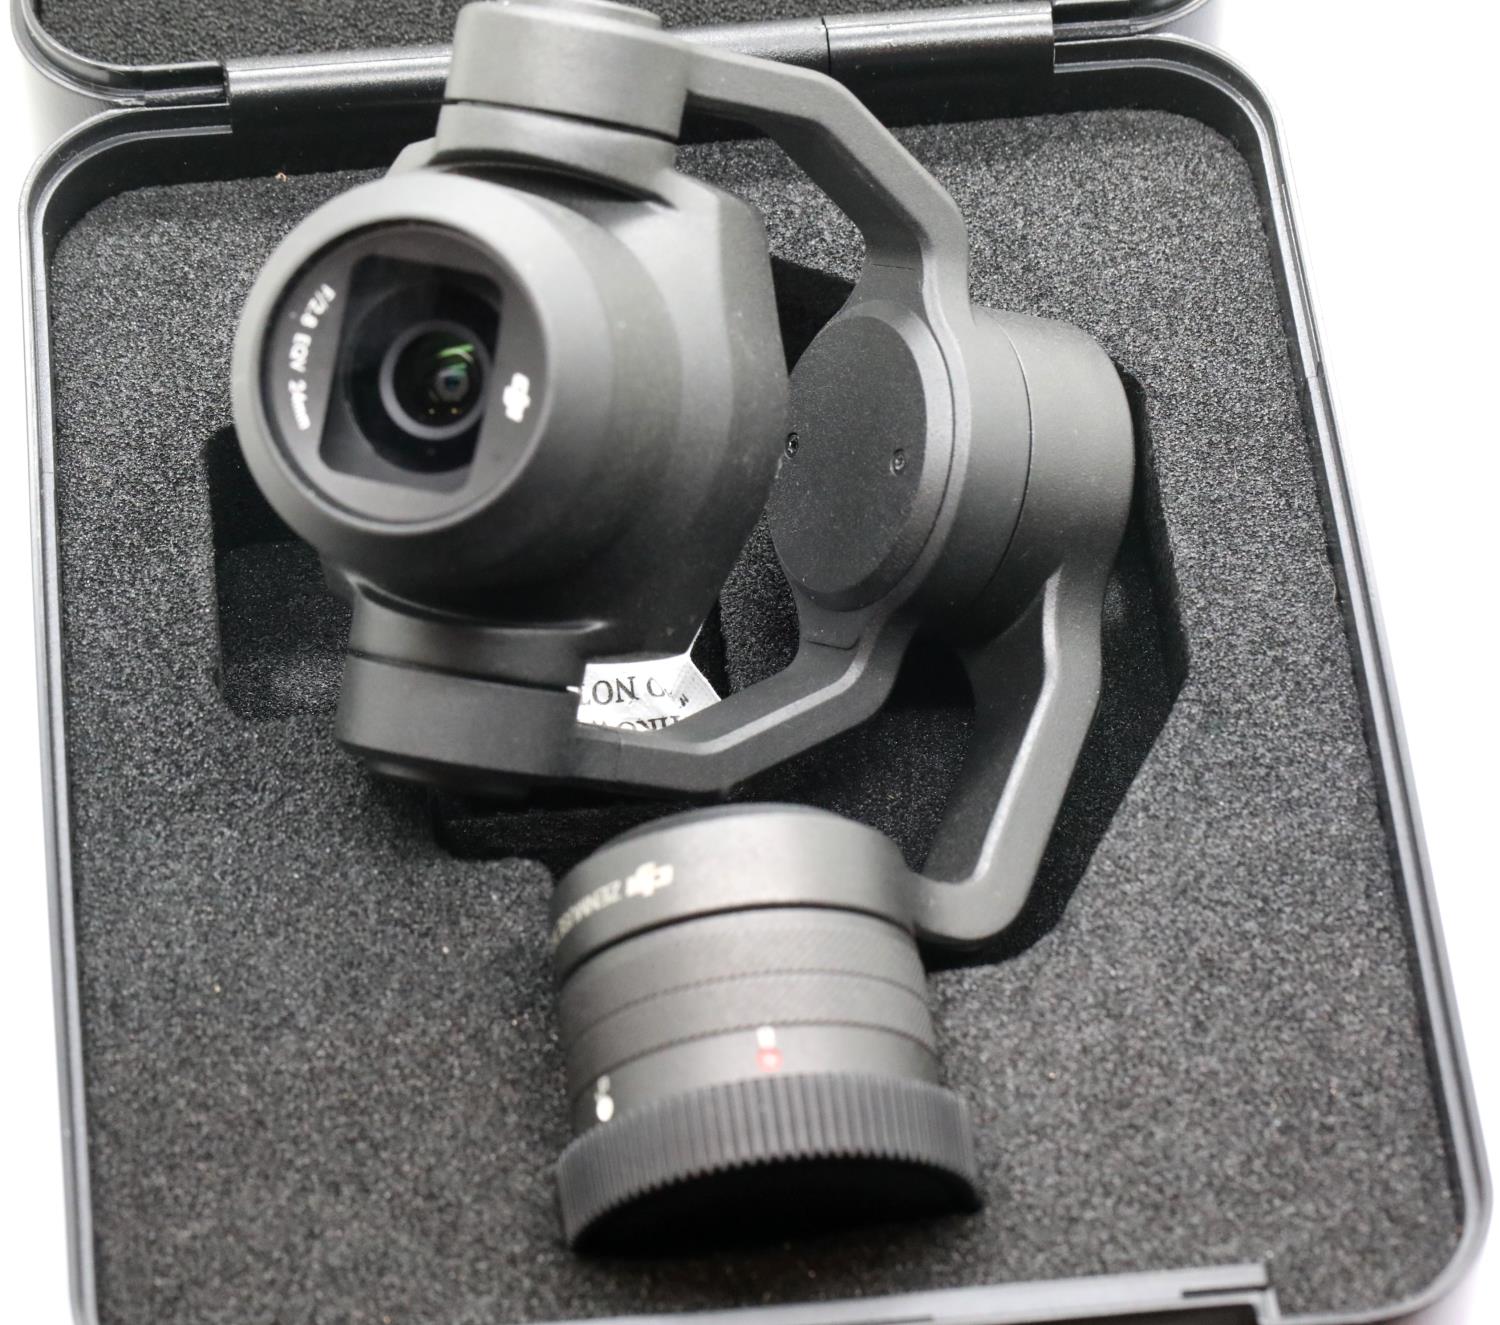 dji X4S gimbal and camera, boxed. P&P Group 1 (£14+VAT for the first lot and £1+VAT for subsequent